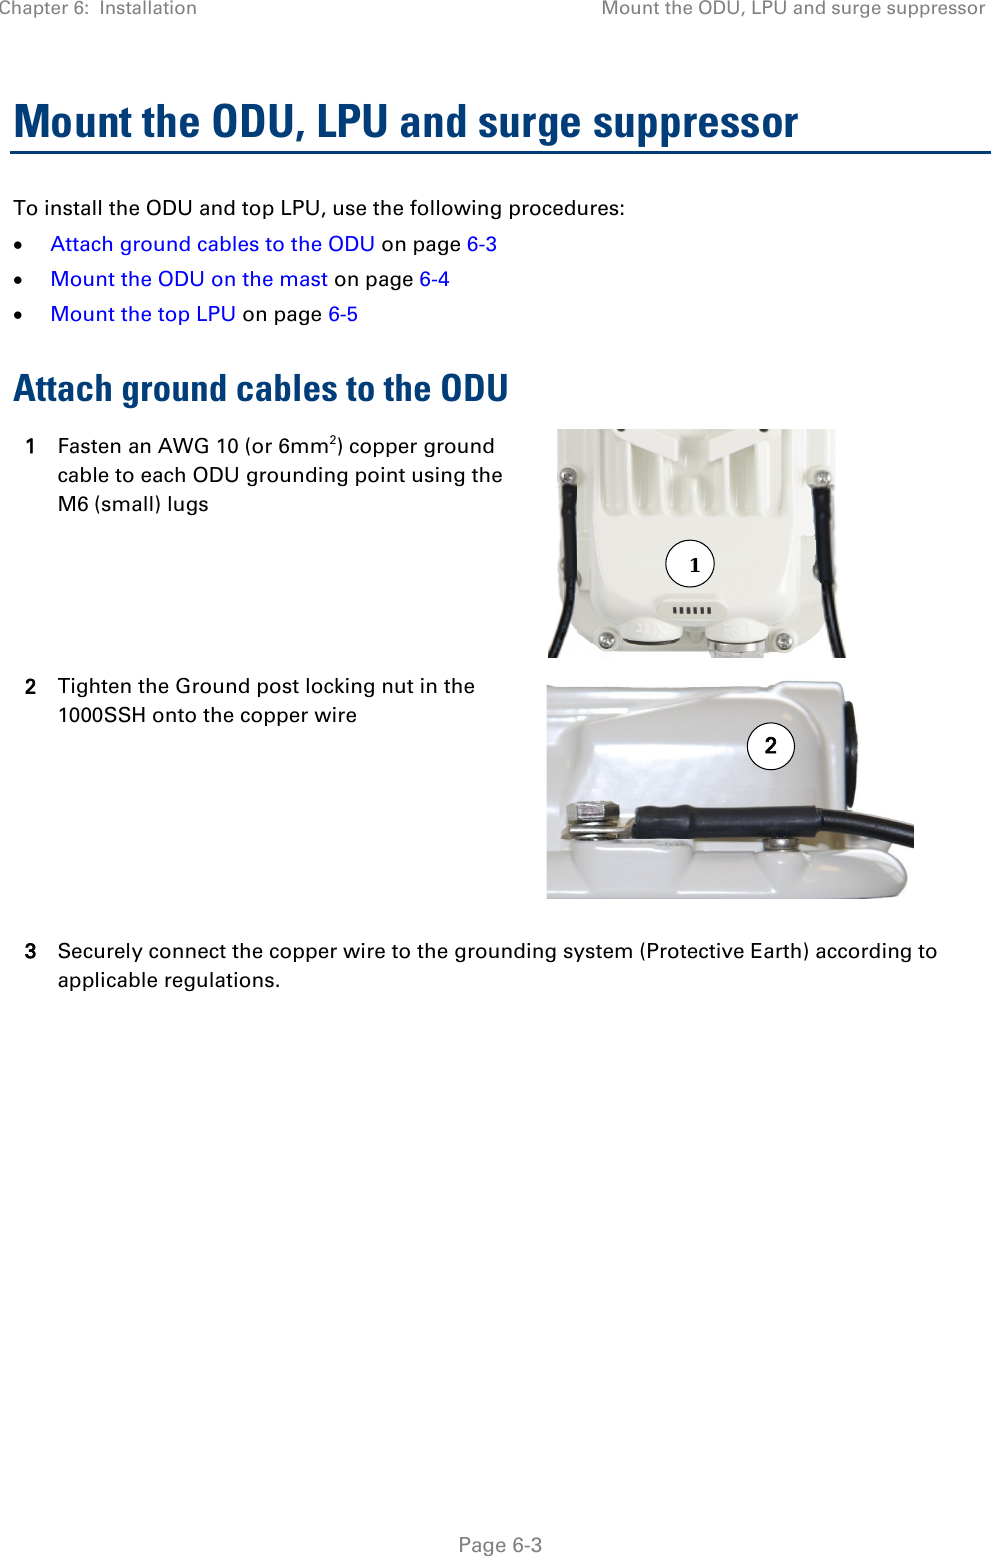 Chapter 6:  Installation Mount the ODU, LPU and surge suppressor   Page 6-3 Mount the ODU, LPU and surge suppressor To install the ODU and top LPU, use the following procedures: • Attach ground cables to the ODU on page 6-3 • Mount the ODU on the mast on page 6-4 • Mount the top LPU on page 6-5 Attach ground cables to the ODU 1 Fasten an AWG 10 (or 6mm2) copper ground cable to each ODU grounding point using the M6 (small) lugs  2 Tighten the Ground post locking nut in the 1000SSH onto the copper wire  3 Securely connect the copper wire to the grounding system (Protective Earth) according to applicable regulations.    21 